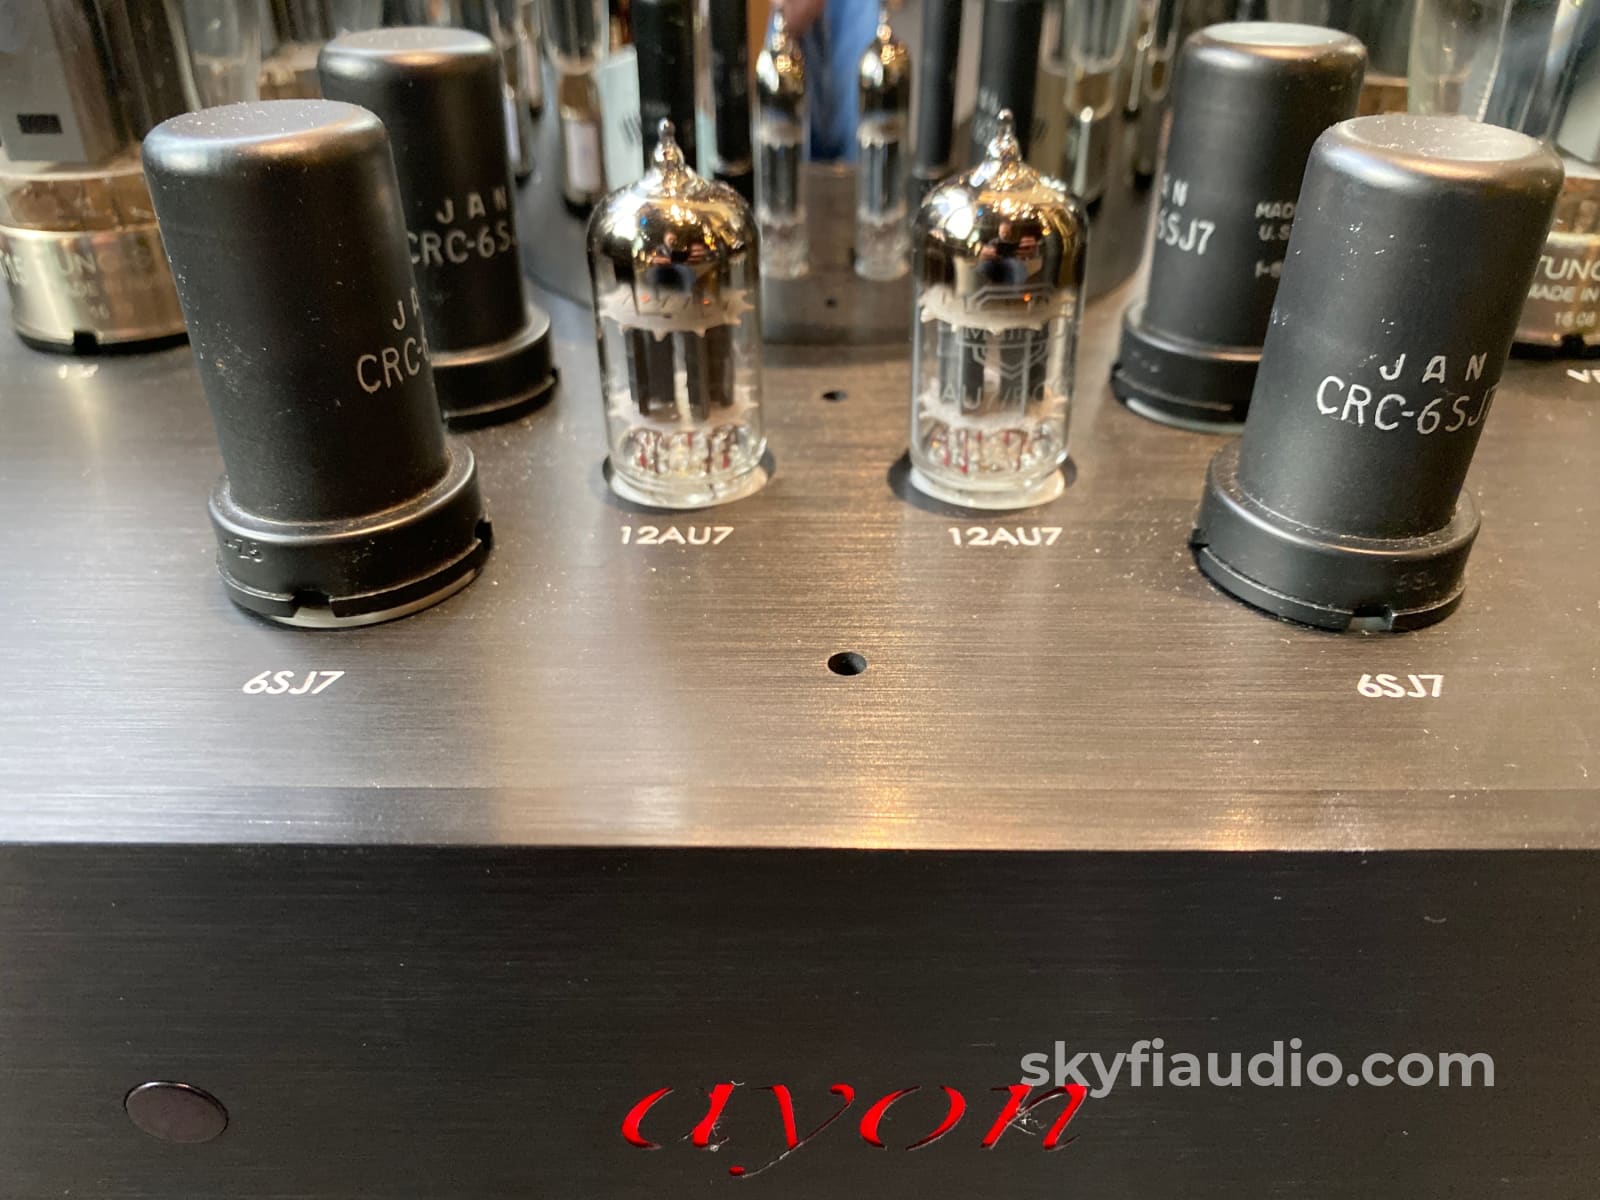 Ayon Triton Iii Integrated Tube Amplifier With Kt150 Tubes - Pentode And Triode Switchable